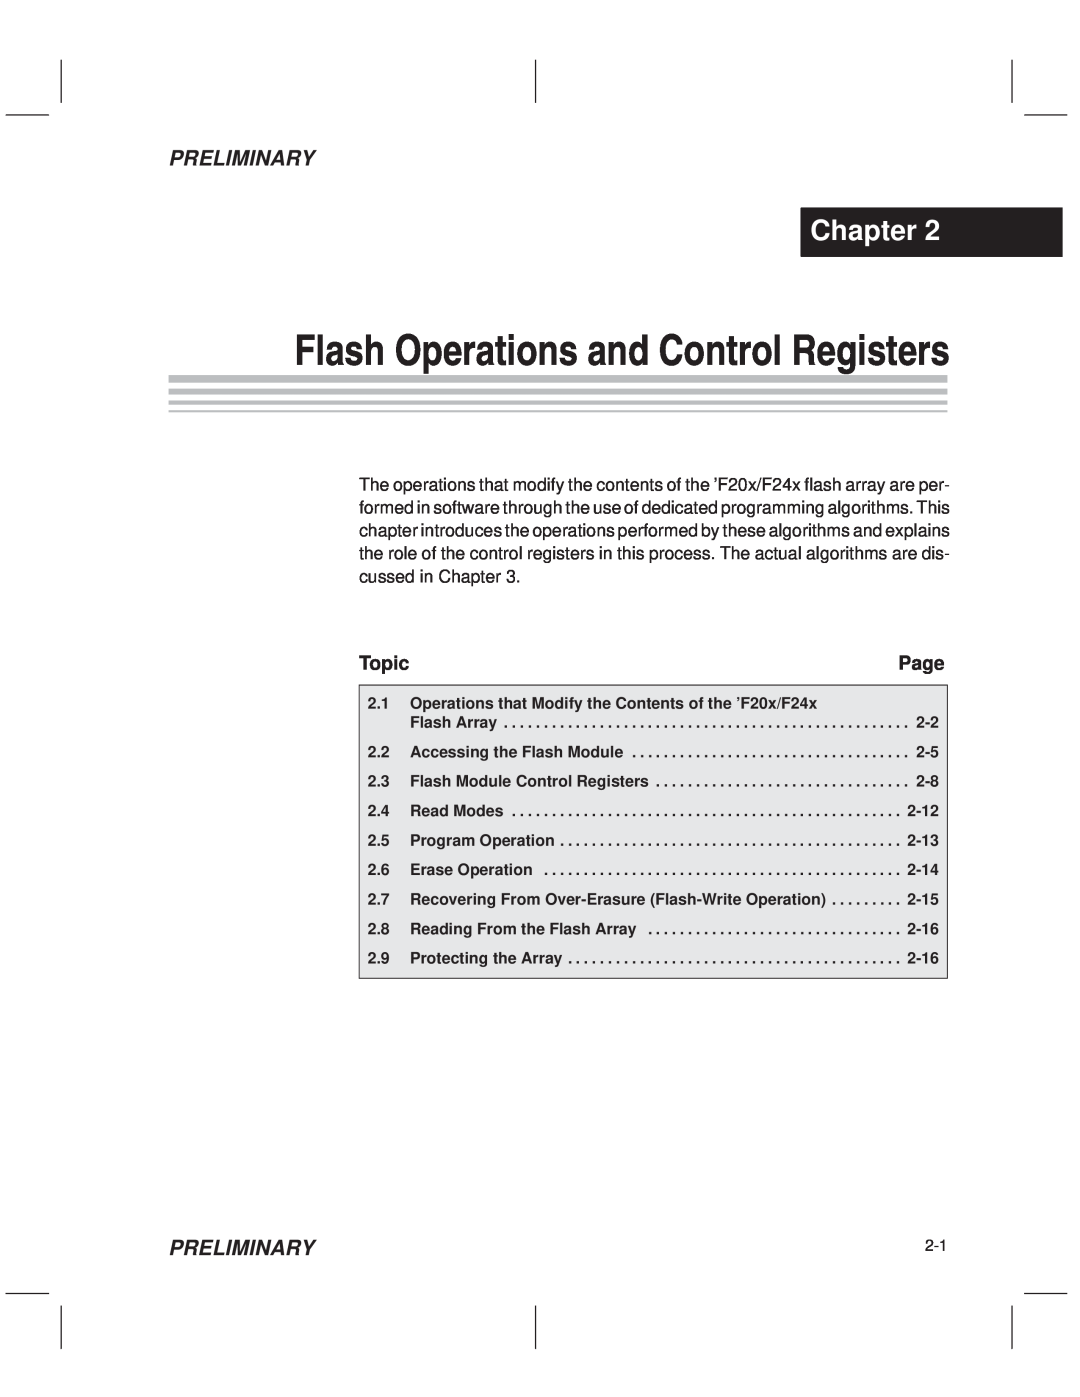 Texas Instruments TMS320F20x/F24x DSP manual Topic, Page, Flash Operations and Control Registers, Chapter, Preliminary 